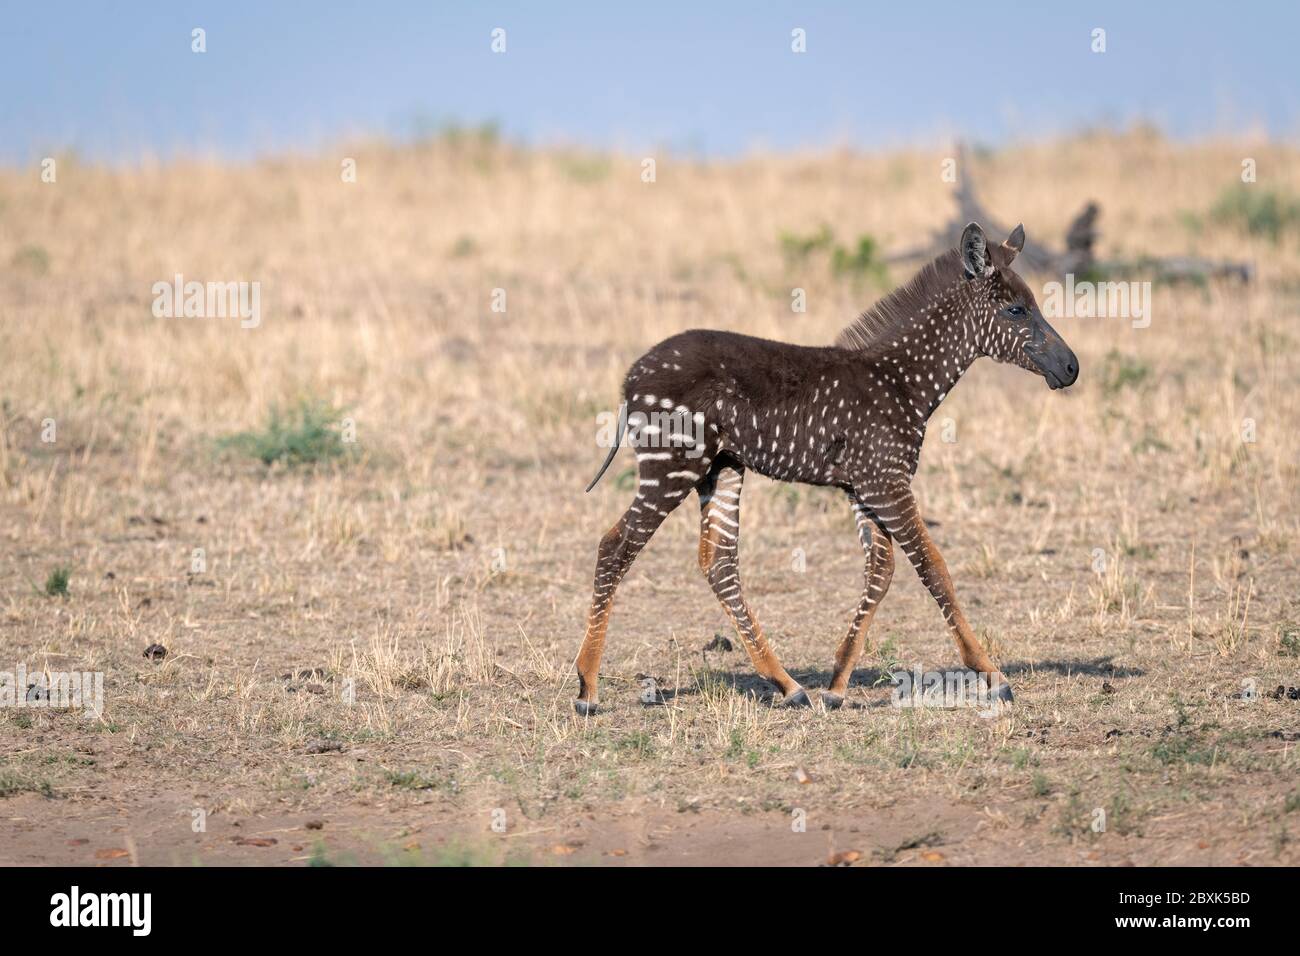 Rare zebra foal with polka dots (spots) instead of stripes, named Tira after the guide who first saw him. Stock Photo